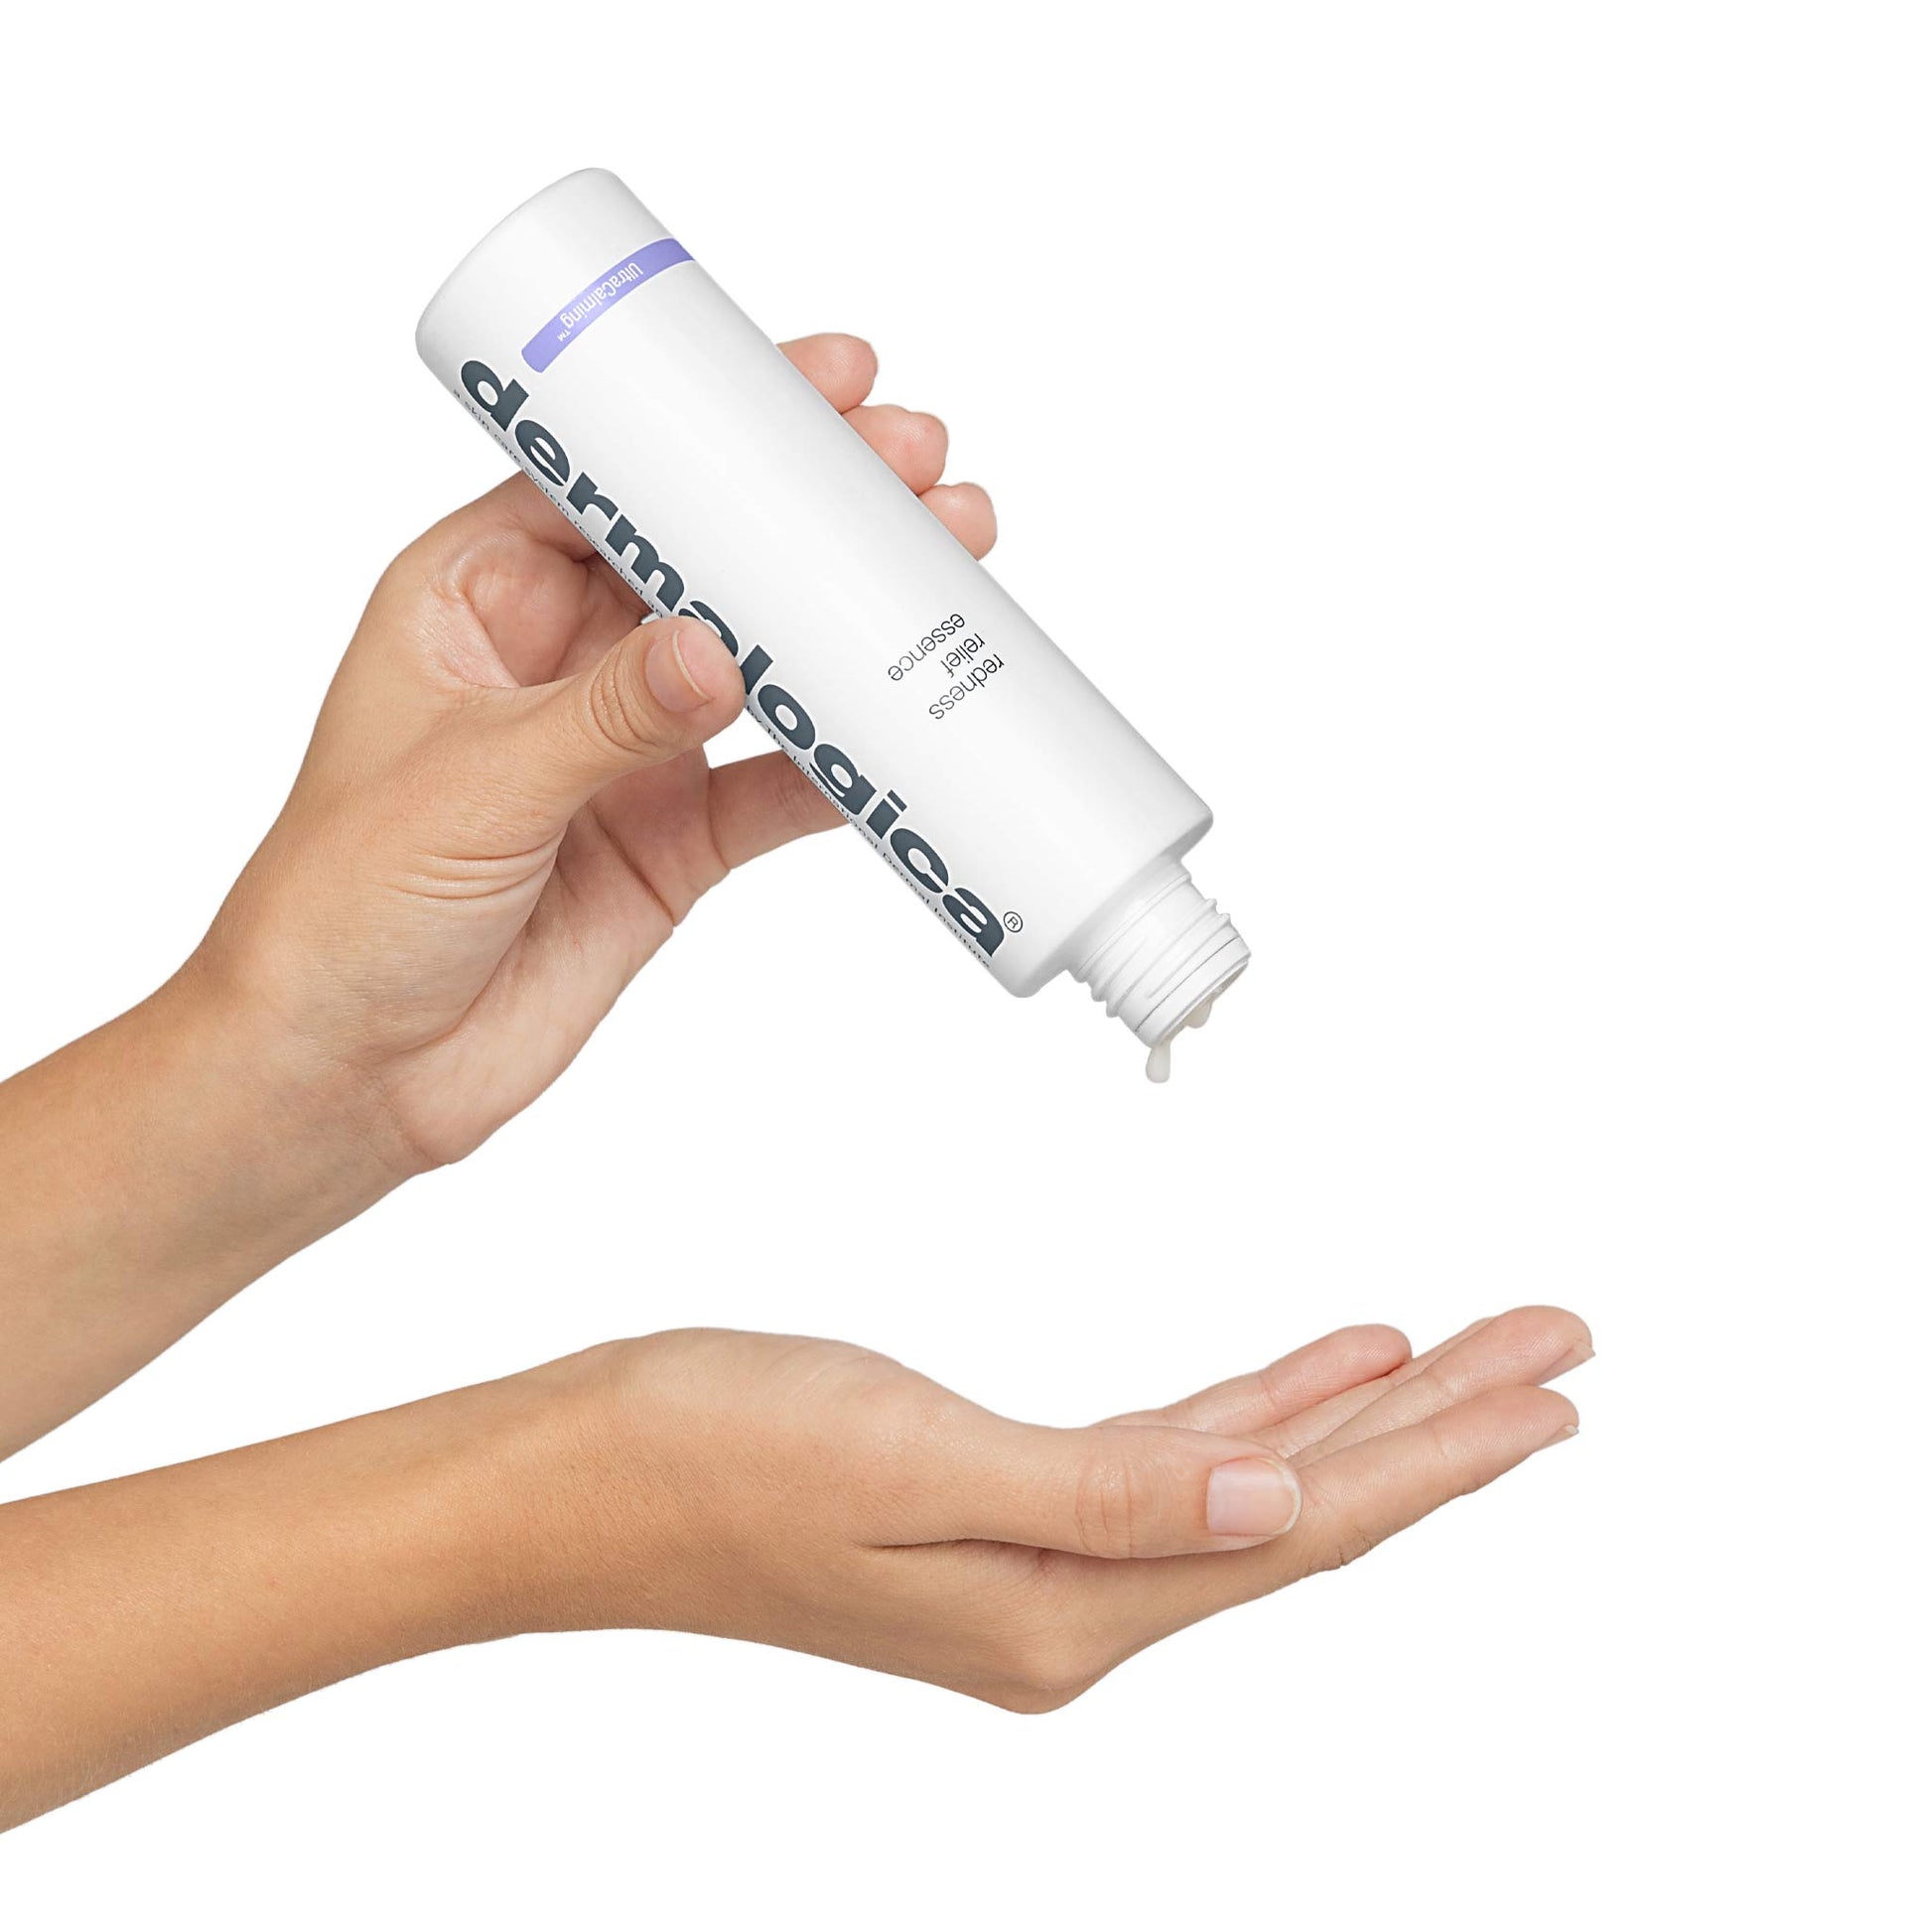 redness relief essence being dispensed into hands